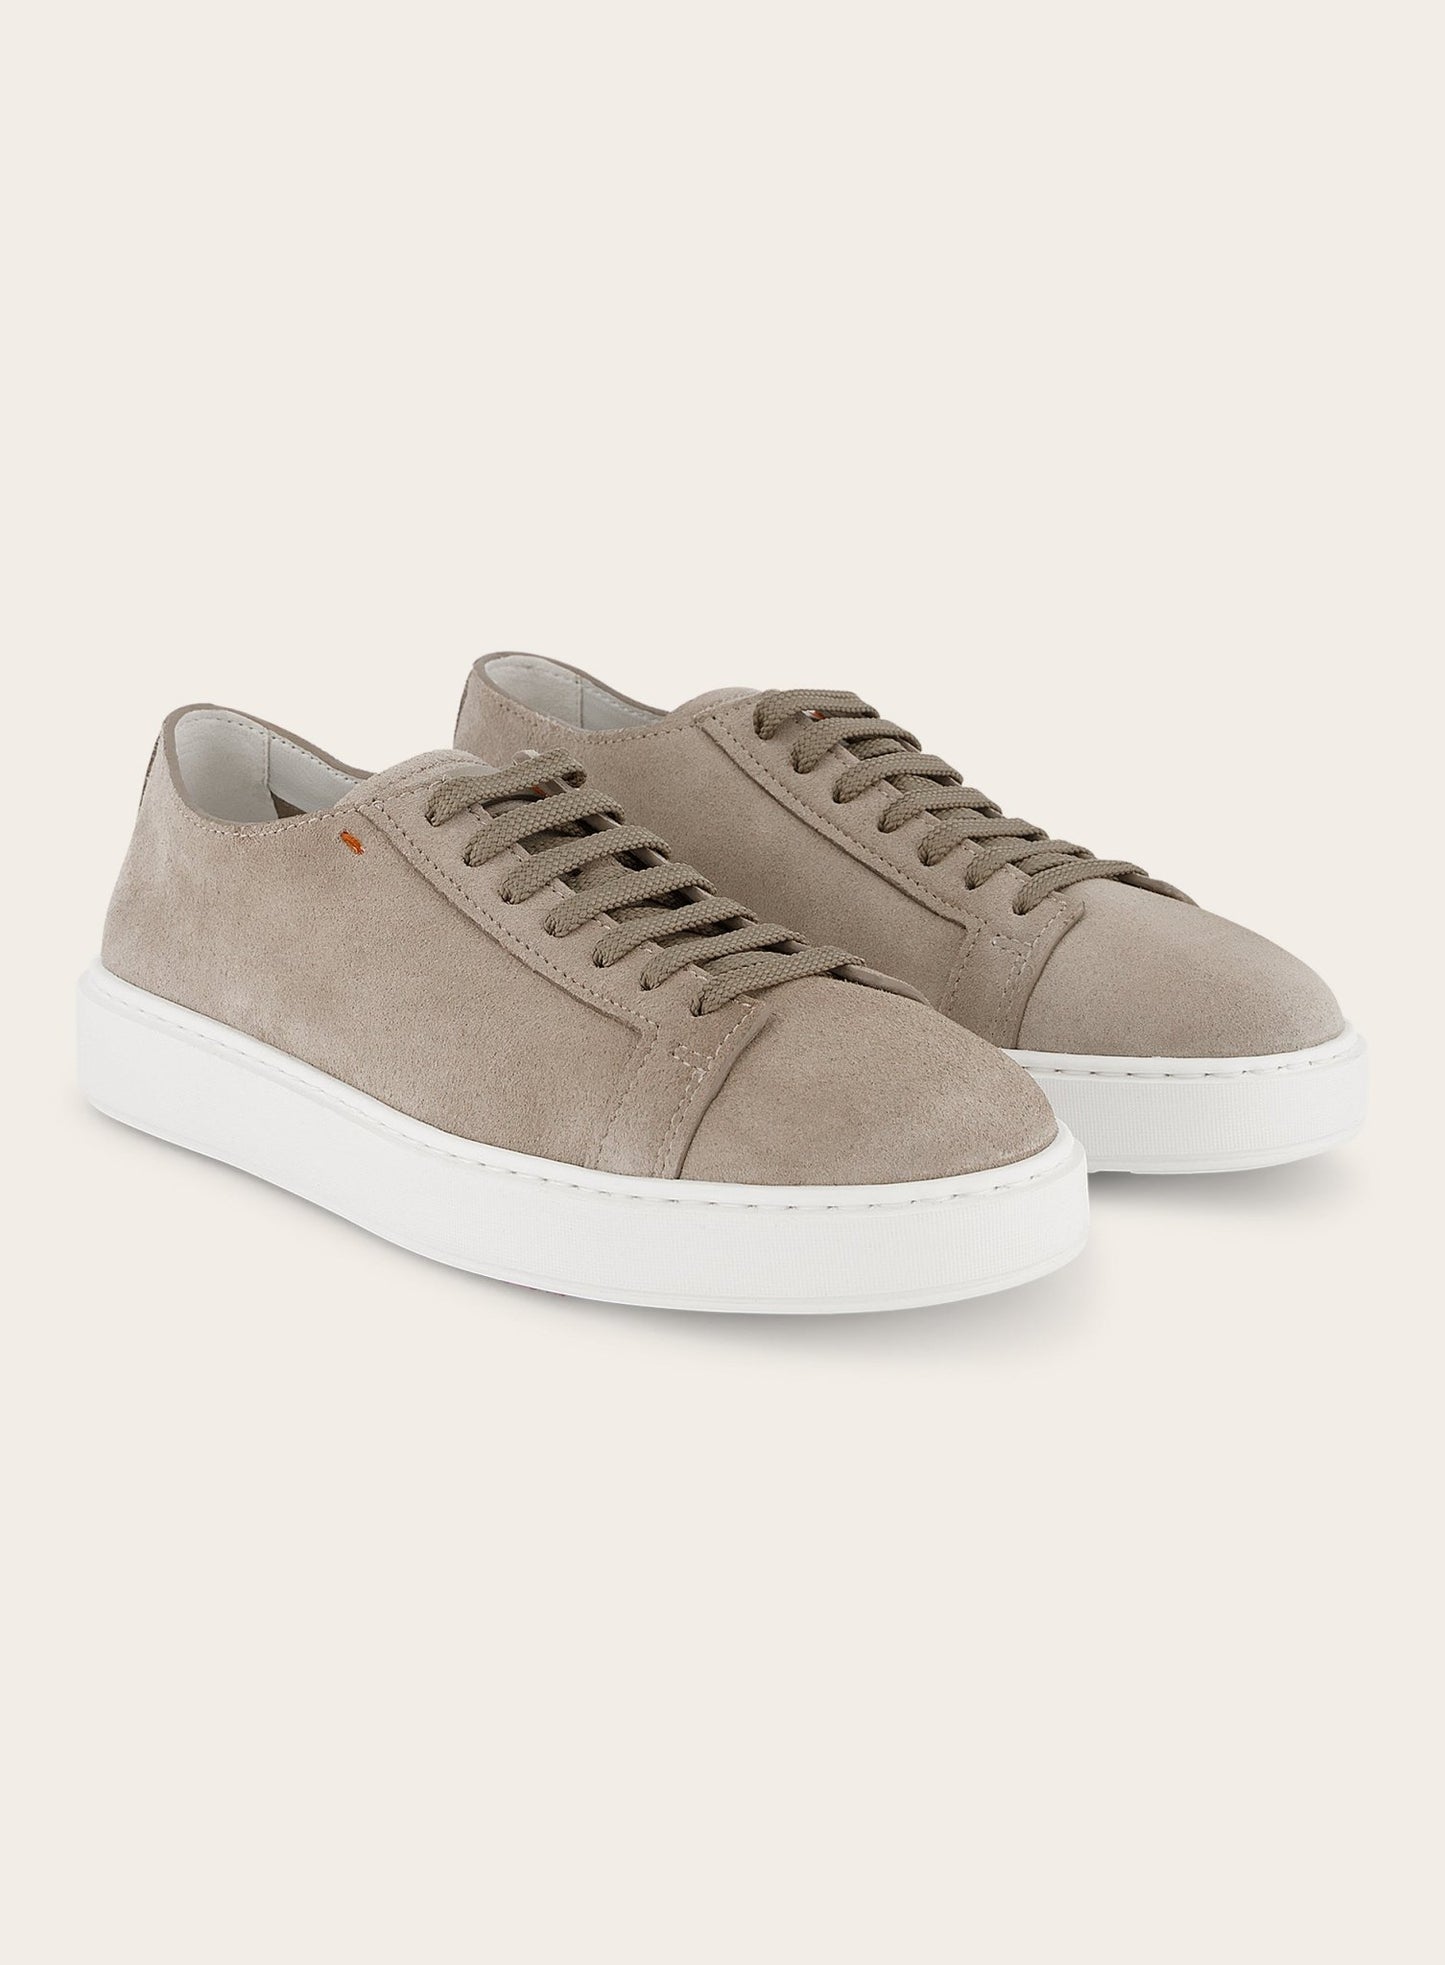 Clean Icon sneakers made of suede